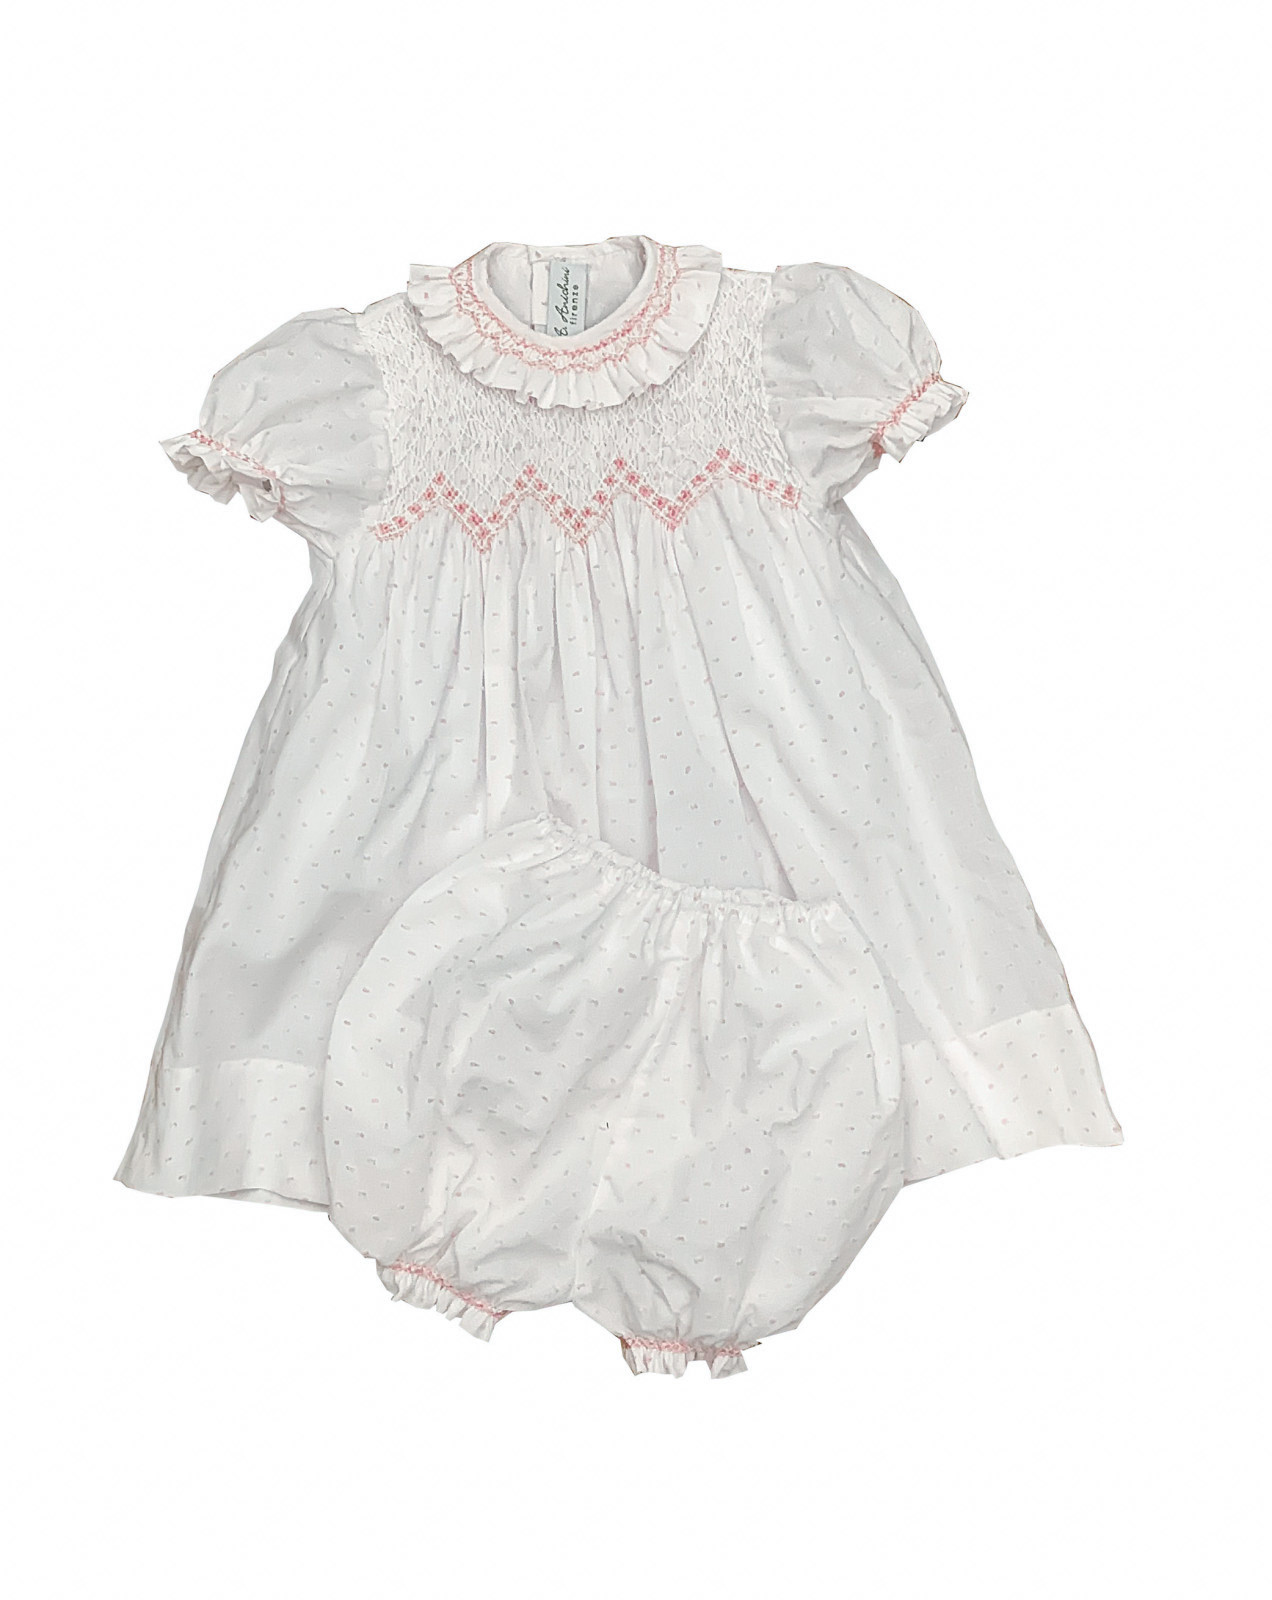 Palmira Baby dress with matching bloomers